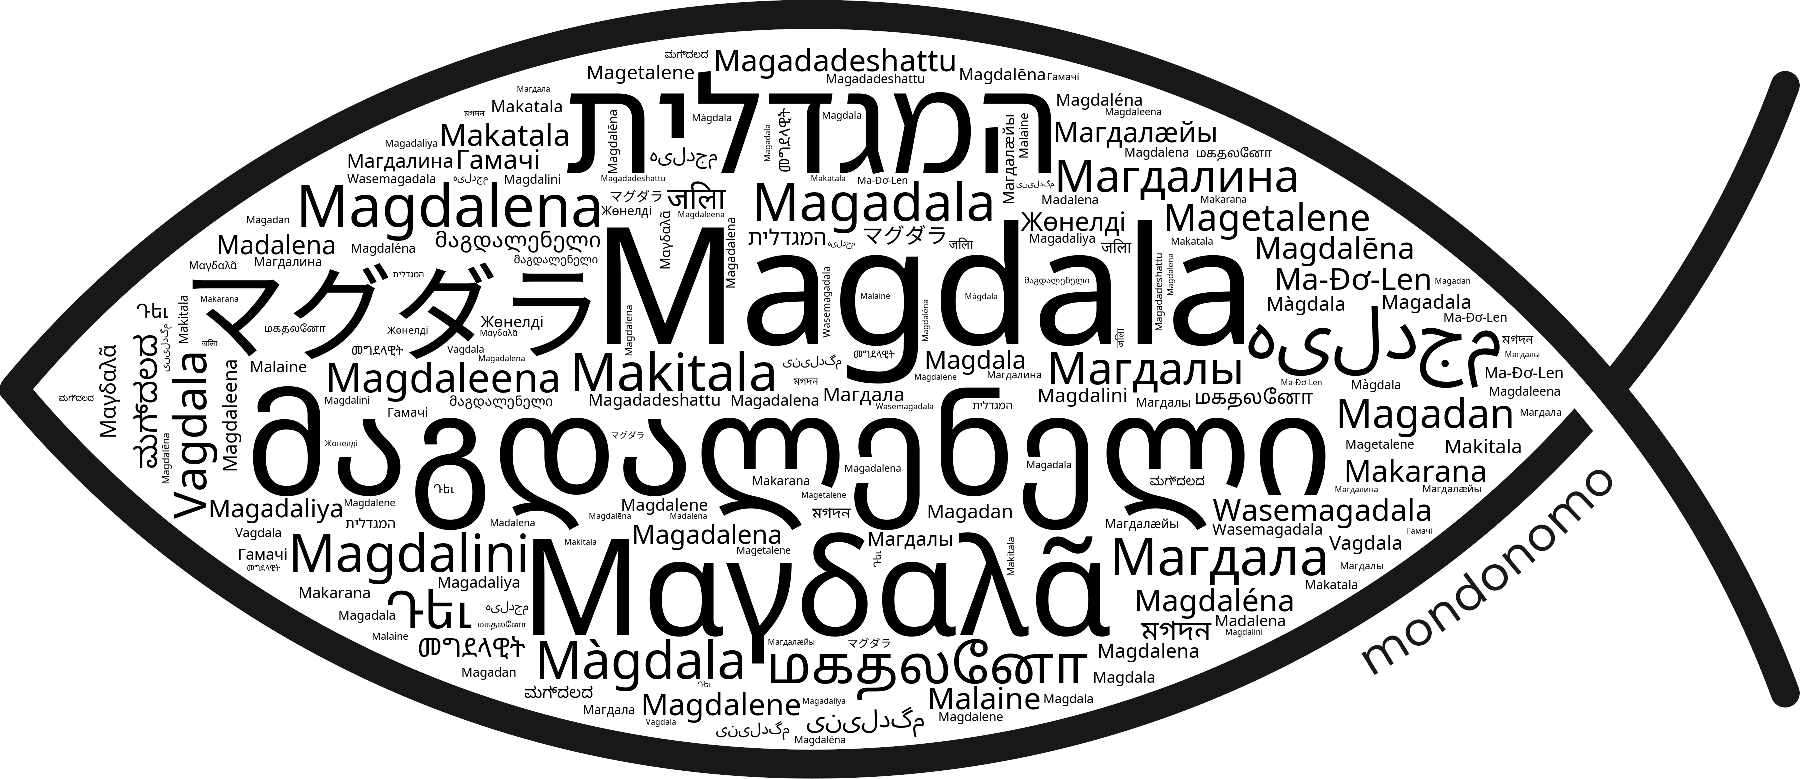 Name Magdala in the world's Bibles